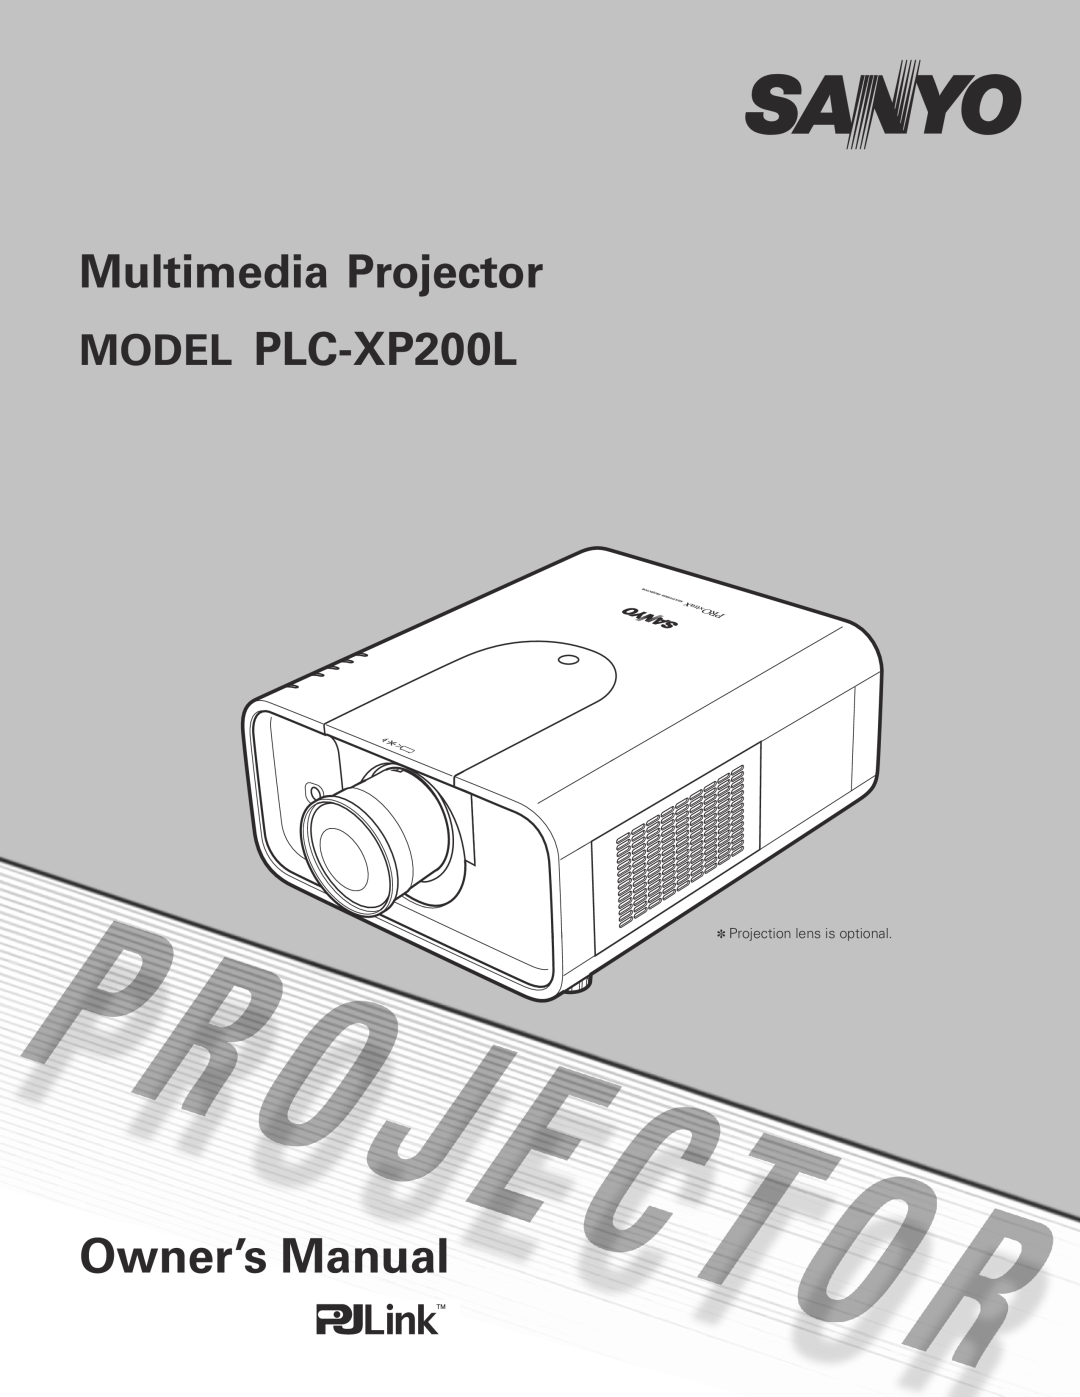 Sanyo owner manual Owner’s Manual, Multimedia Projector MODEL PLC-XP200L, Projection lens is optional 